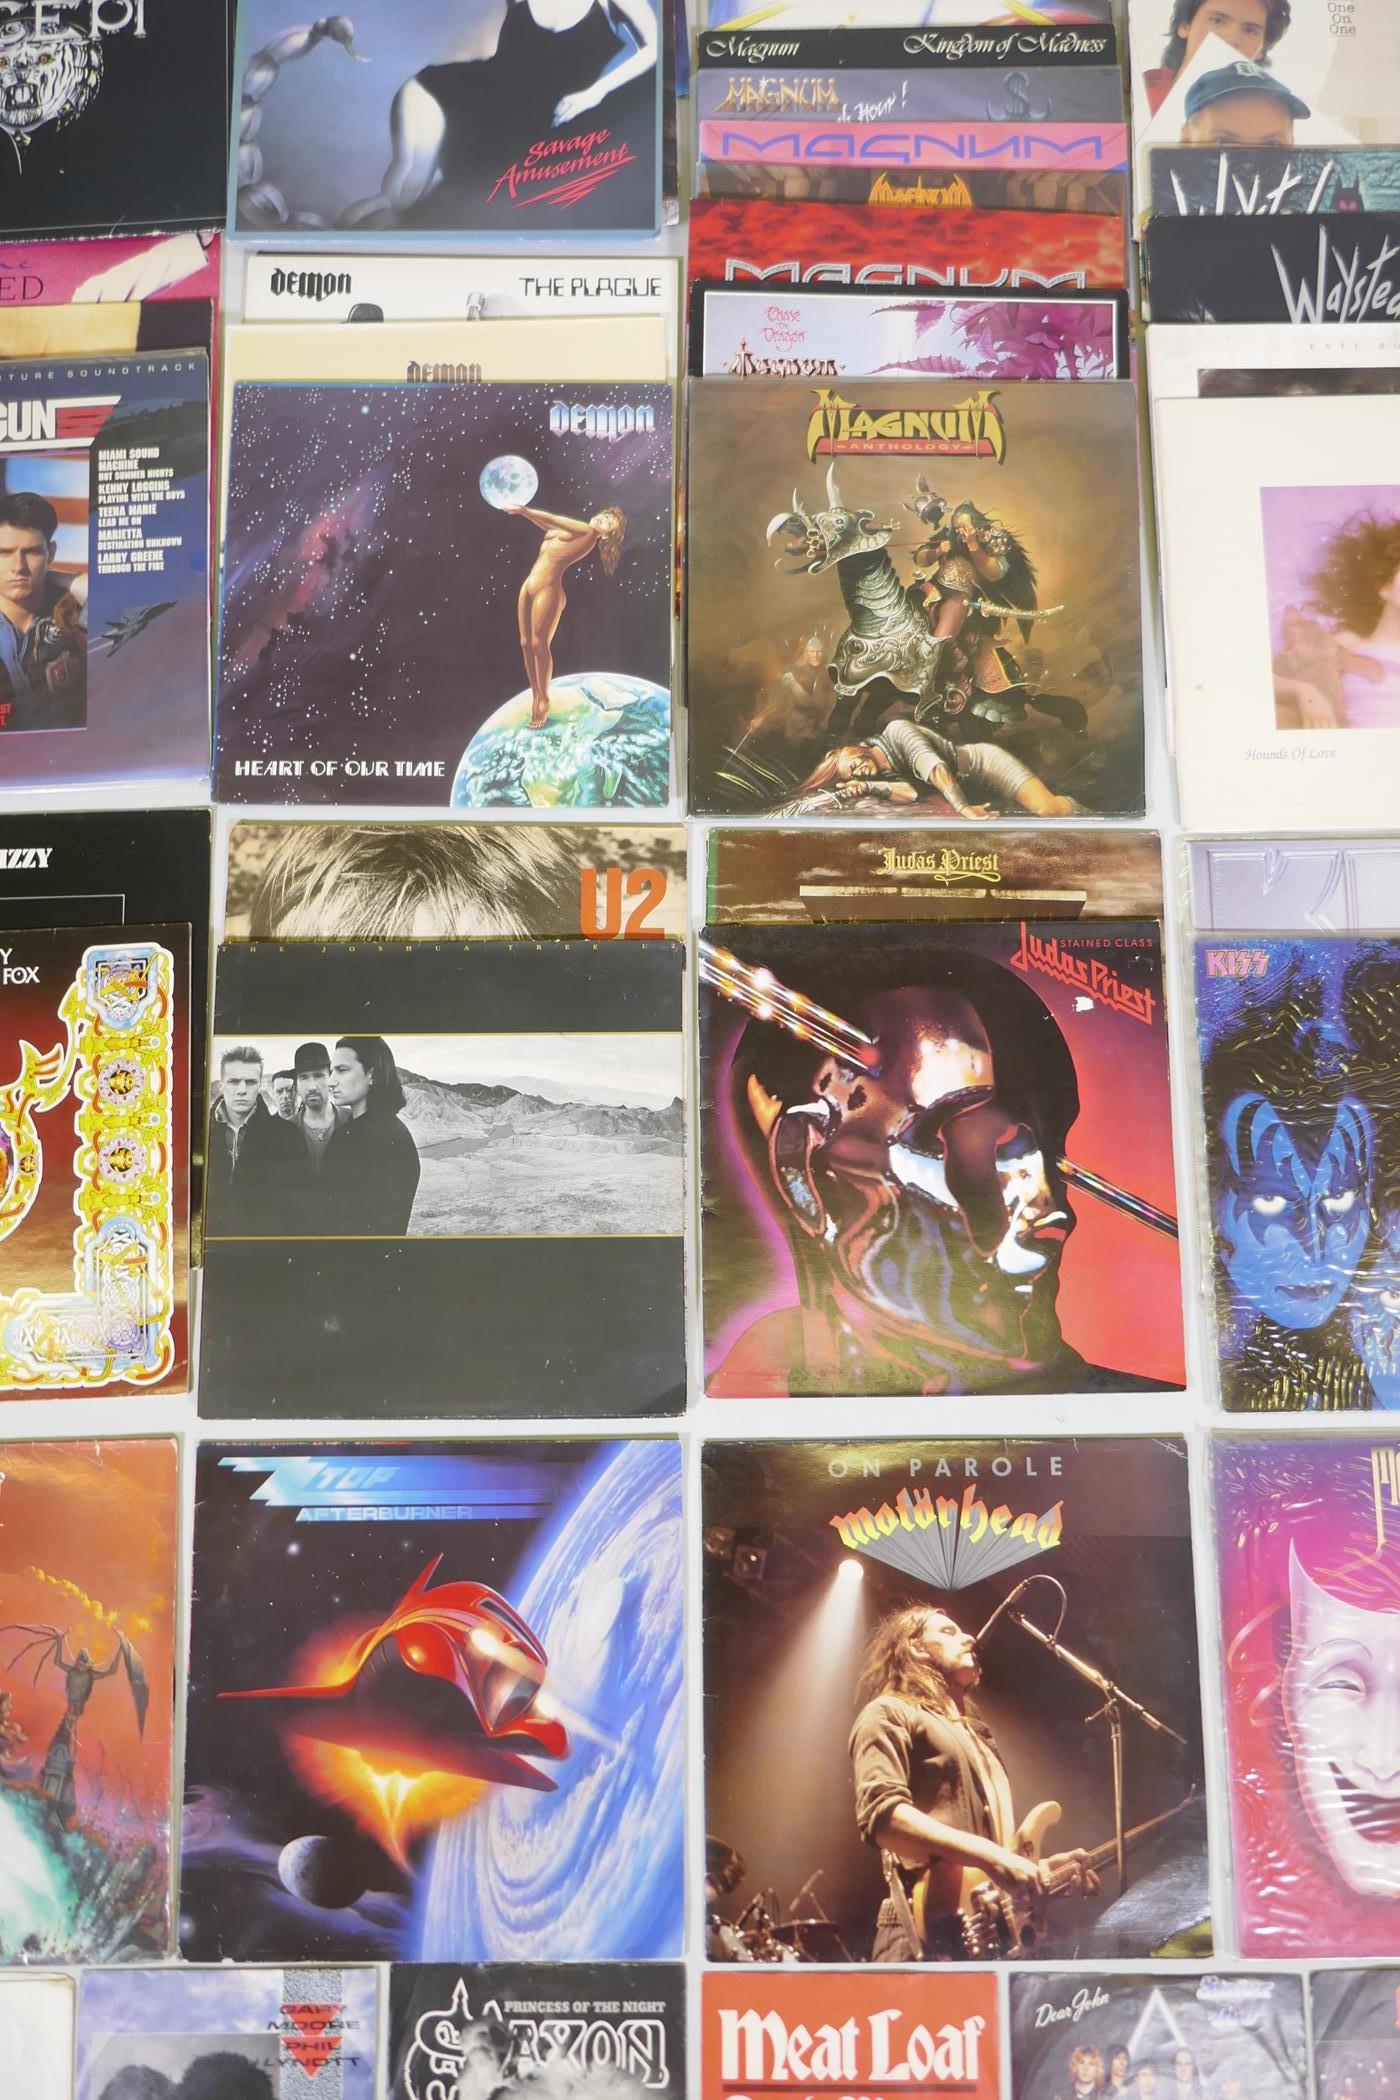 A quantity of 12" metal and rock vinyl LPs including Metallica, Meatloaf, Thin Lizzy, Motorhead, - Image 8 of 16